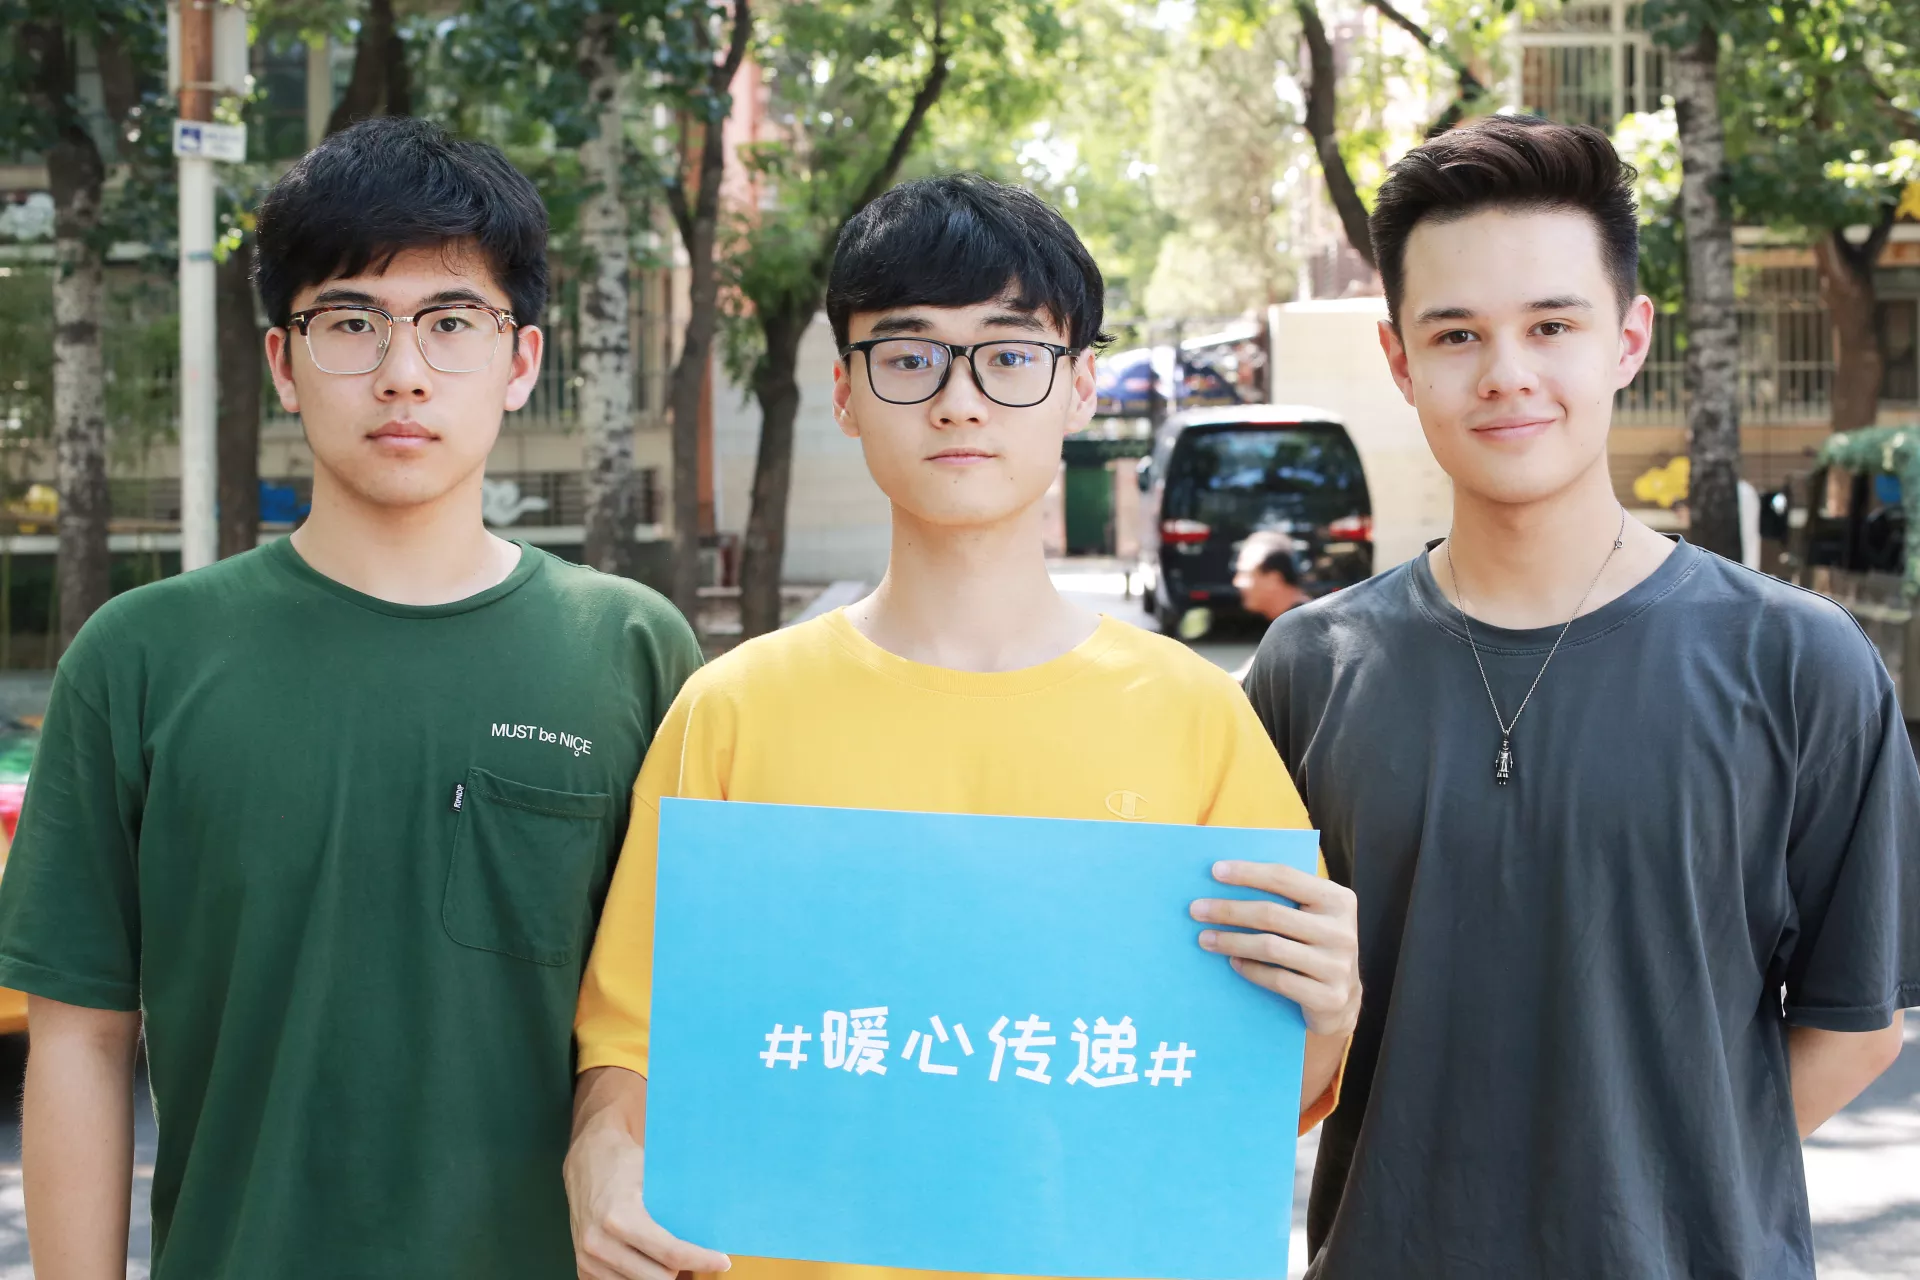 Young people in Beijing advocate for #ChooseKindness campaign to end violence, on 23rd July, 2019.